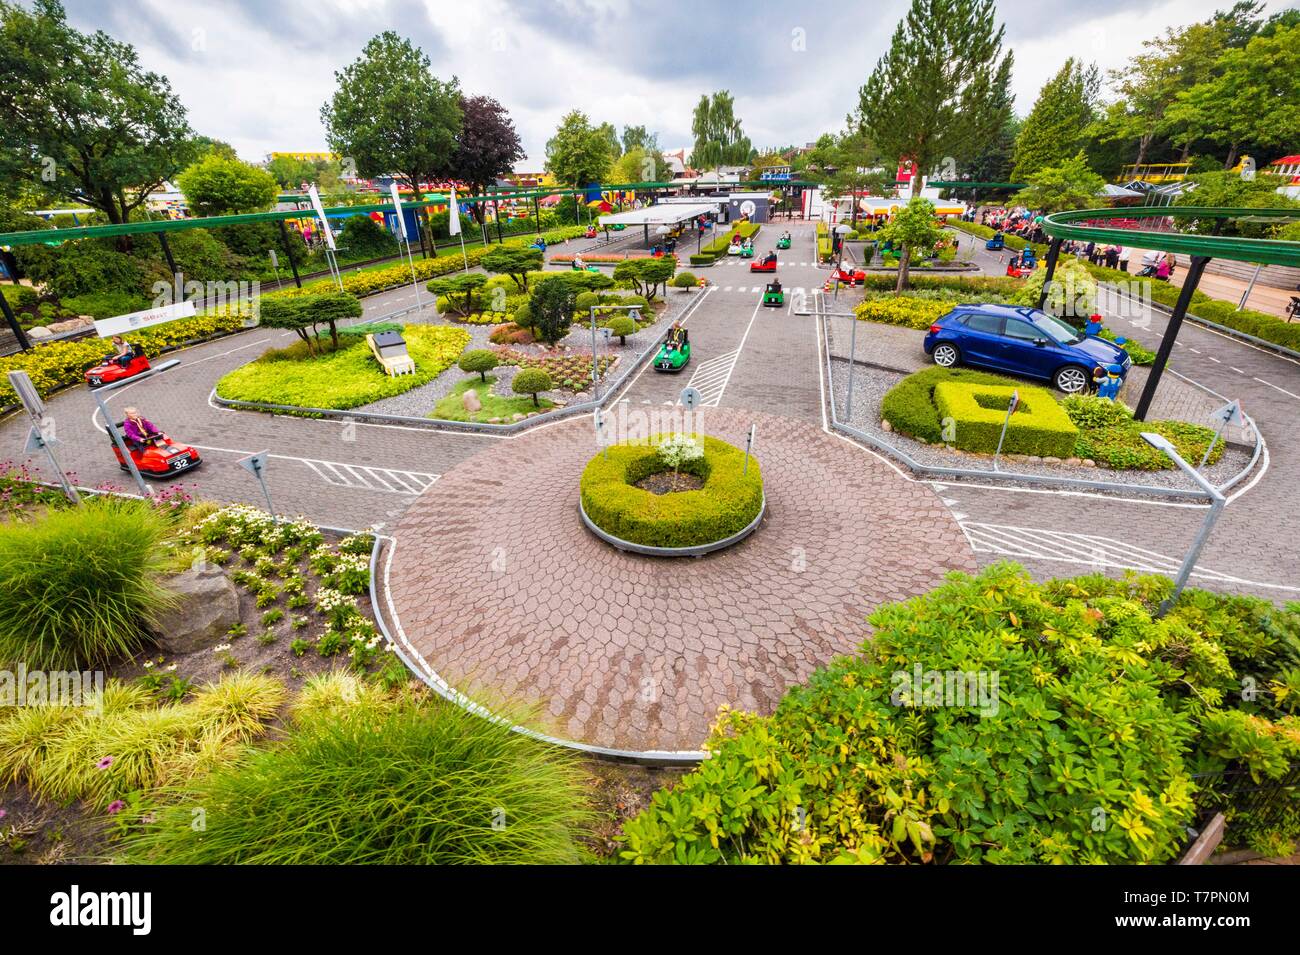 Denmark, Jutland, Billund, Legoland® Billund is the first Legoland Park  established in 1968, near the headquarters of the Lego® company (the term  Lego is derived from the Danish Leg godt meaning plays